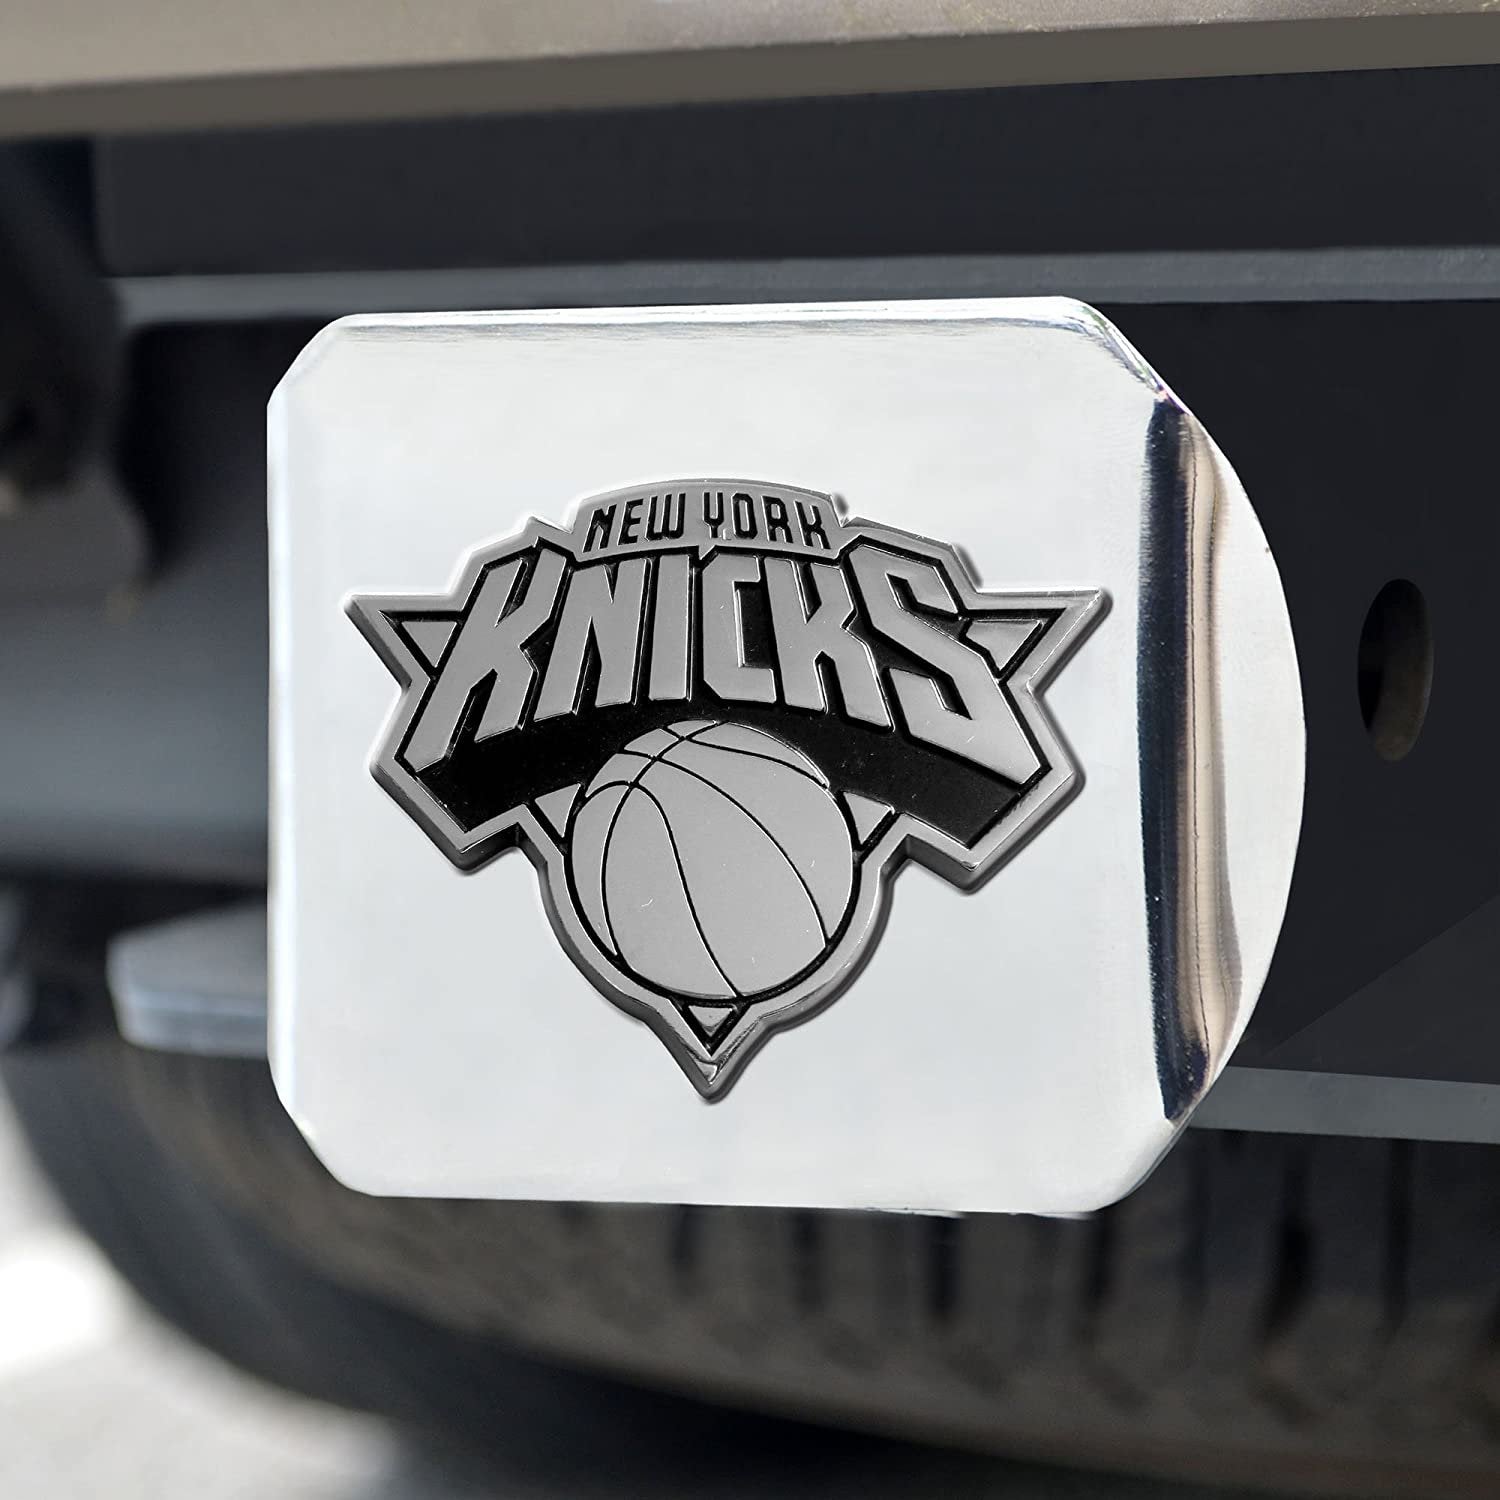 New York Knicks Hitch Cover Solid Metal with Raised Chrome Metal Emblem 2" Square Type III